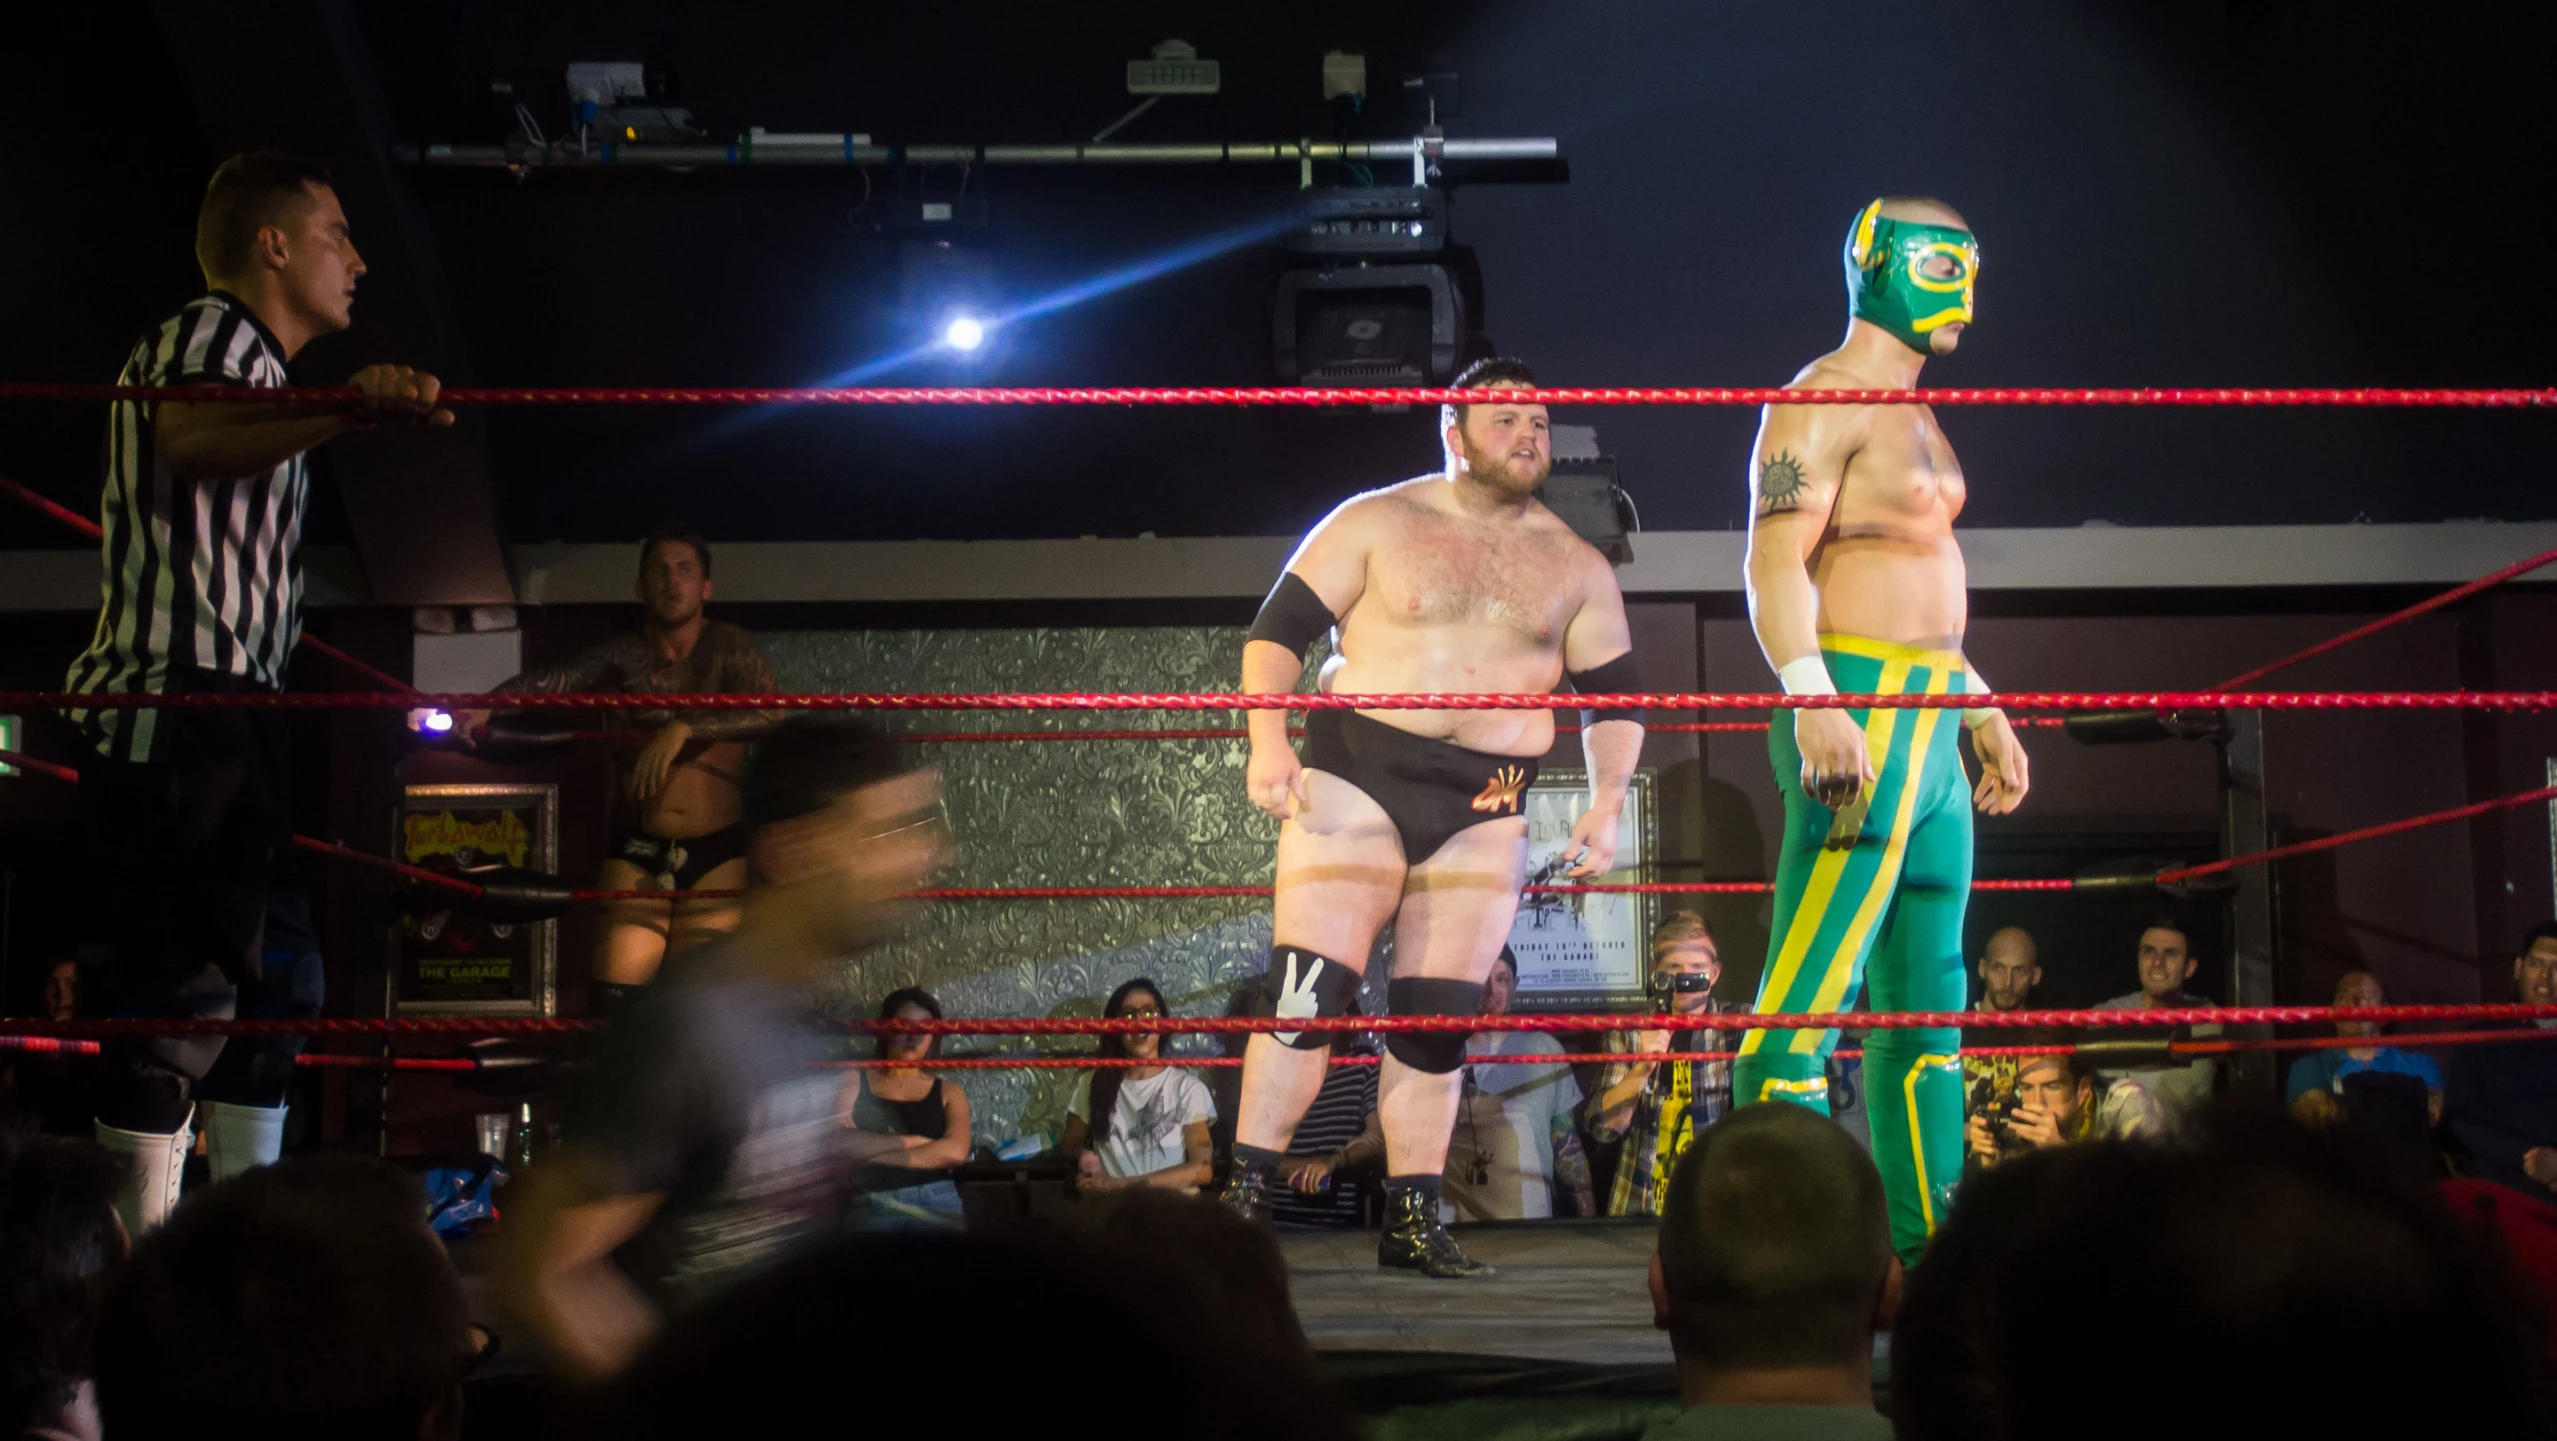 two men in wrestling clothes and one wearing a mask stand at a wrestling ring